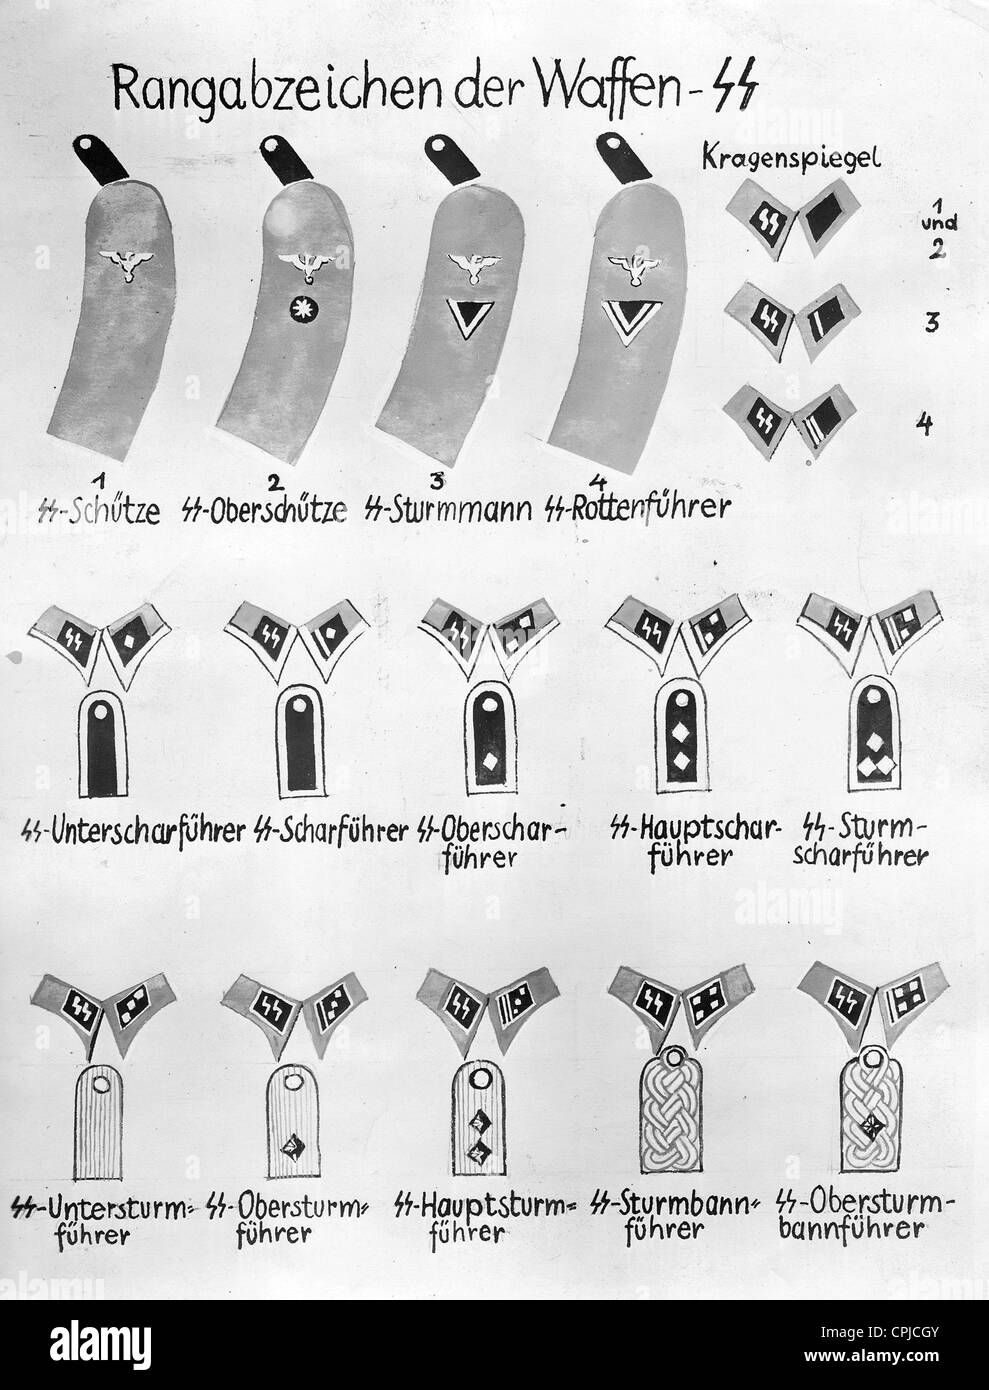 Insignia Of The Waffen Ss CPJCGY 